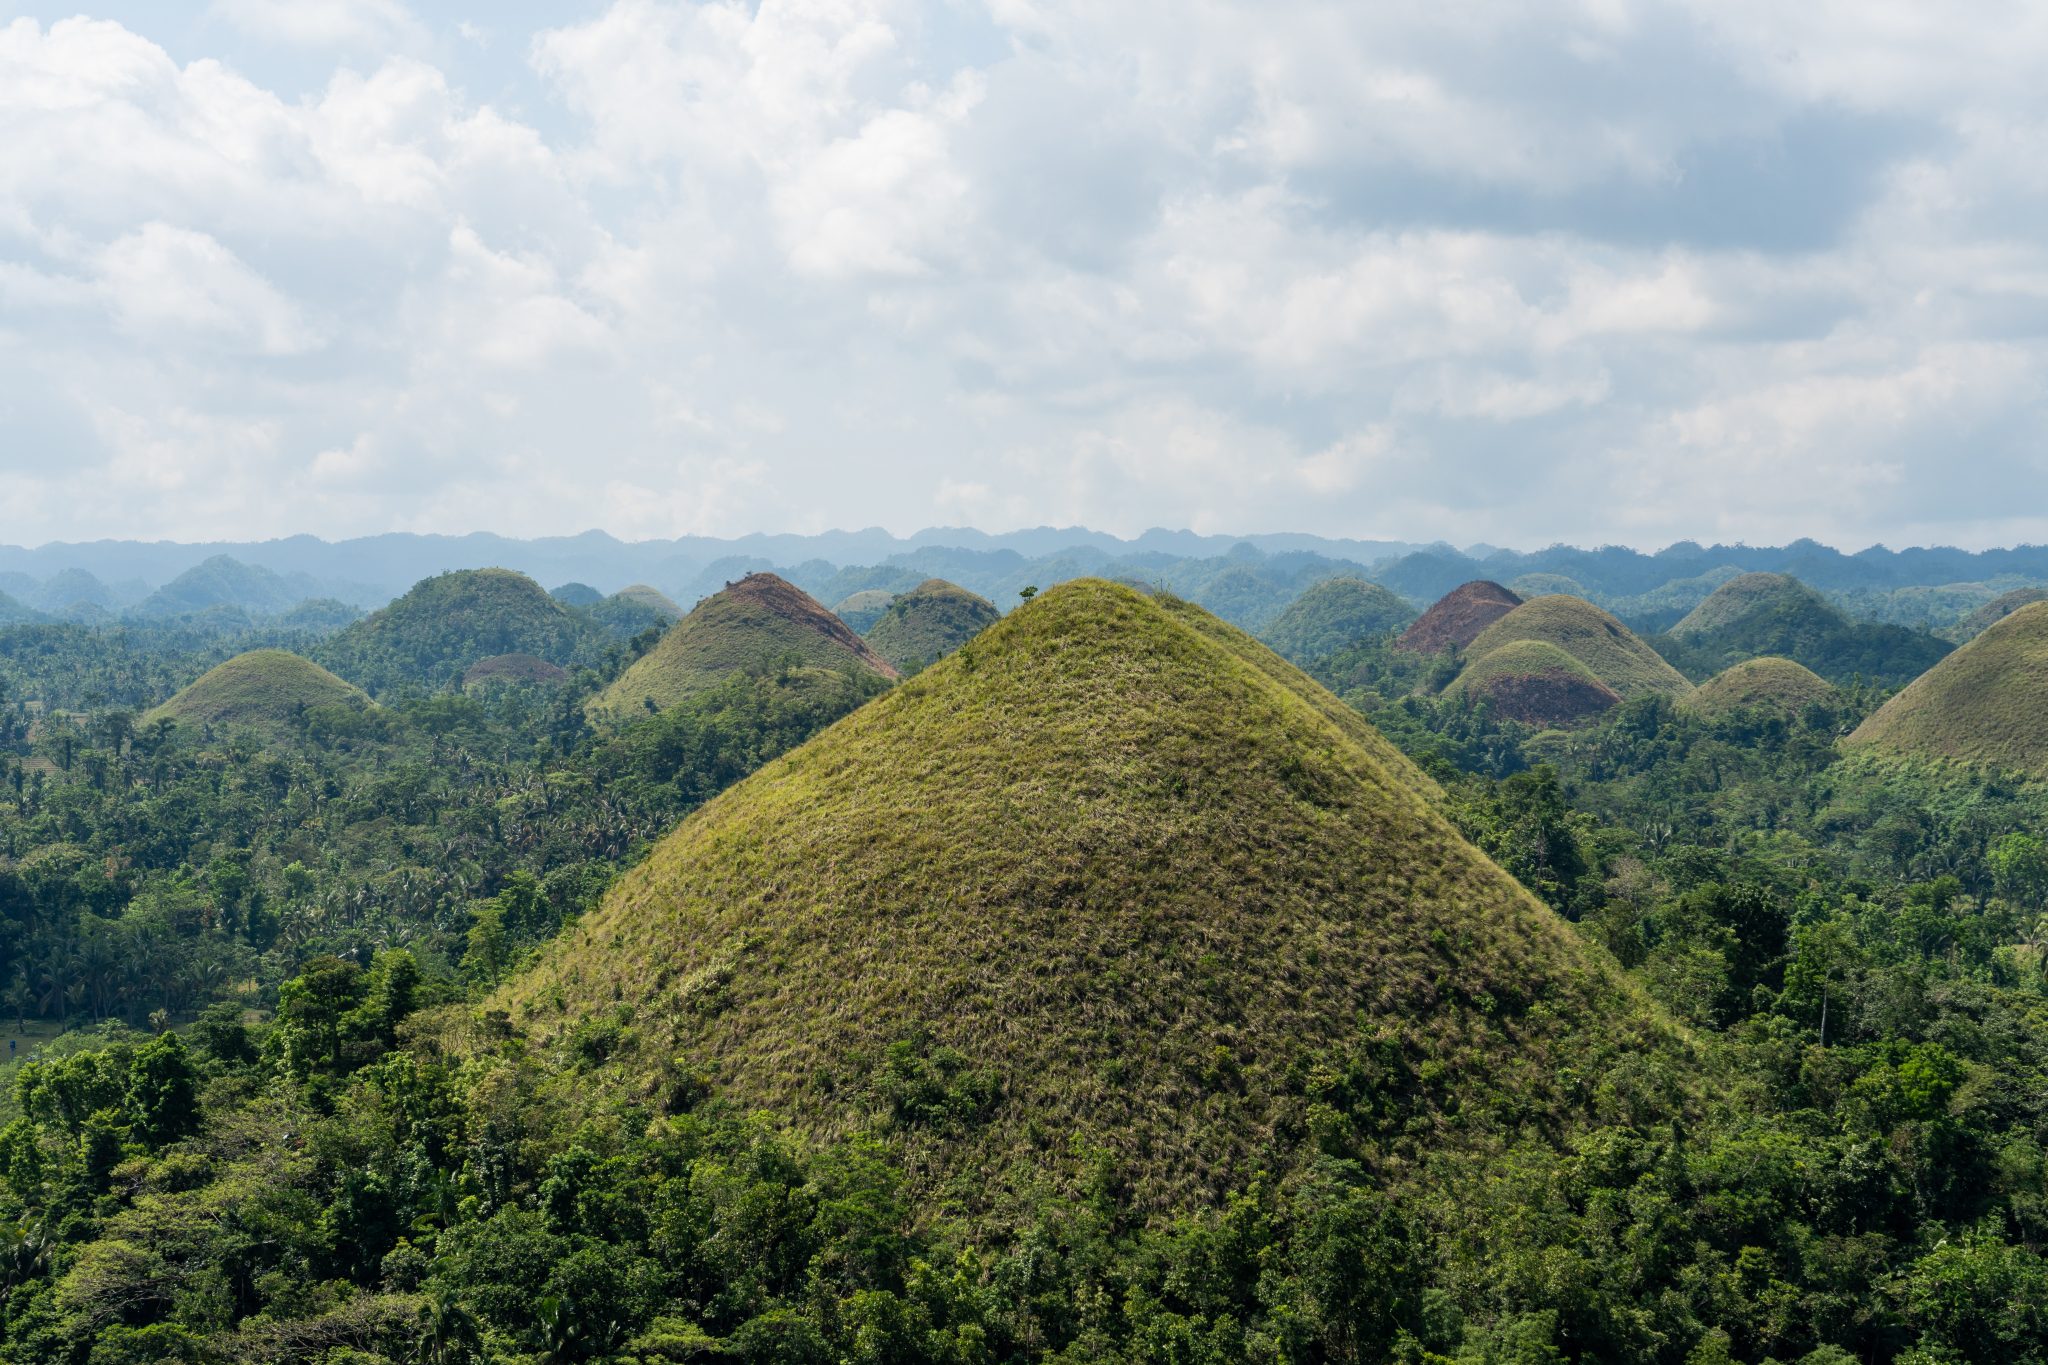 ULTIMATE DAY TRIP TO THE FAMOUS CHOCOLATE HILLS IN BOHOL, PHILIPPINES